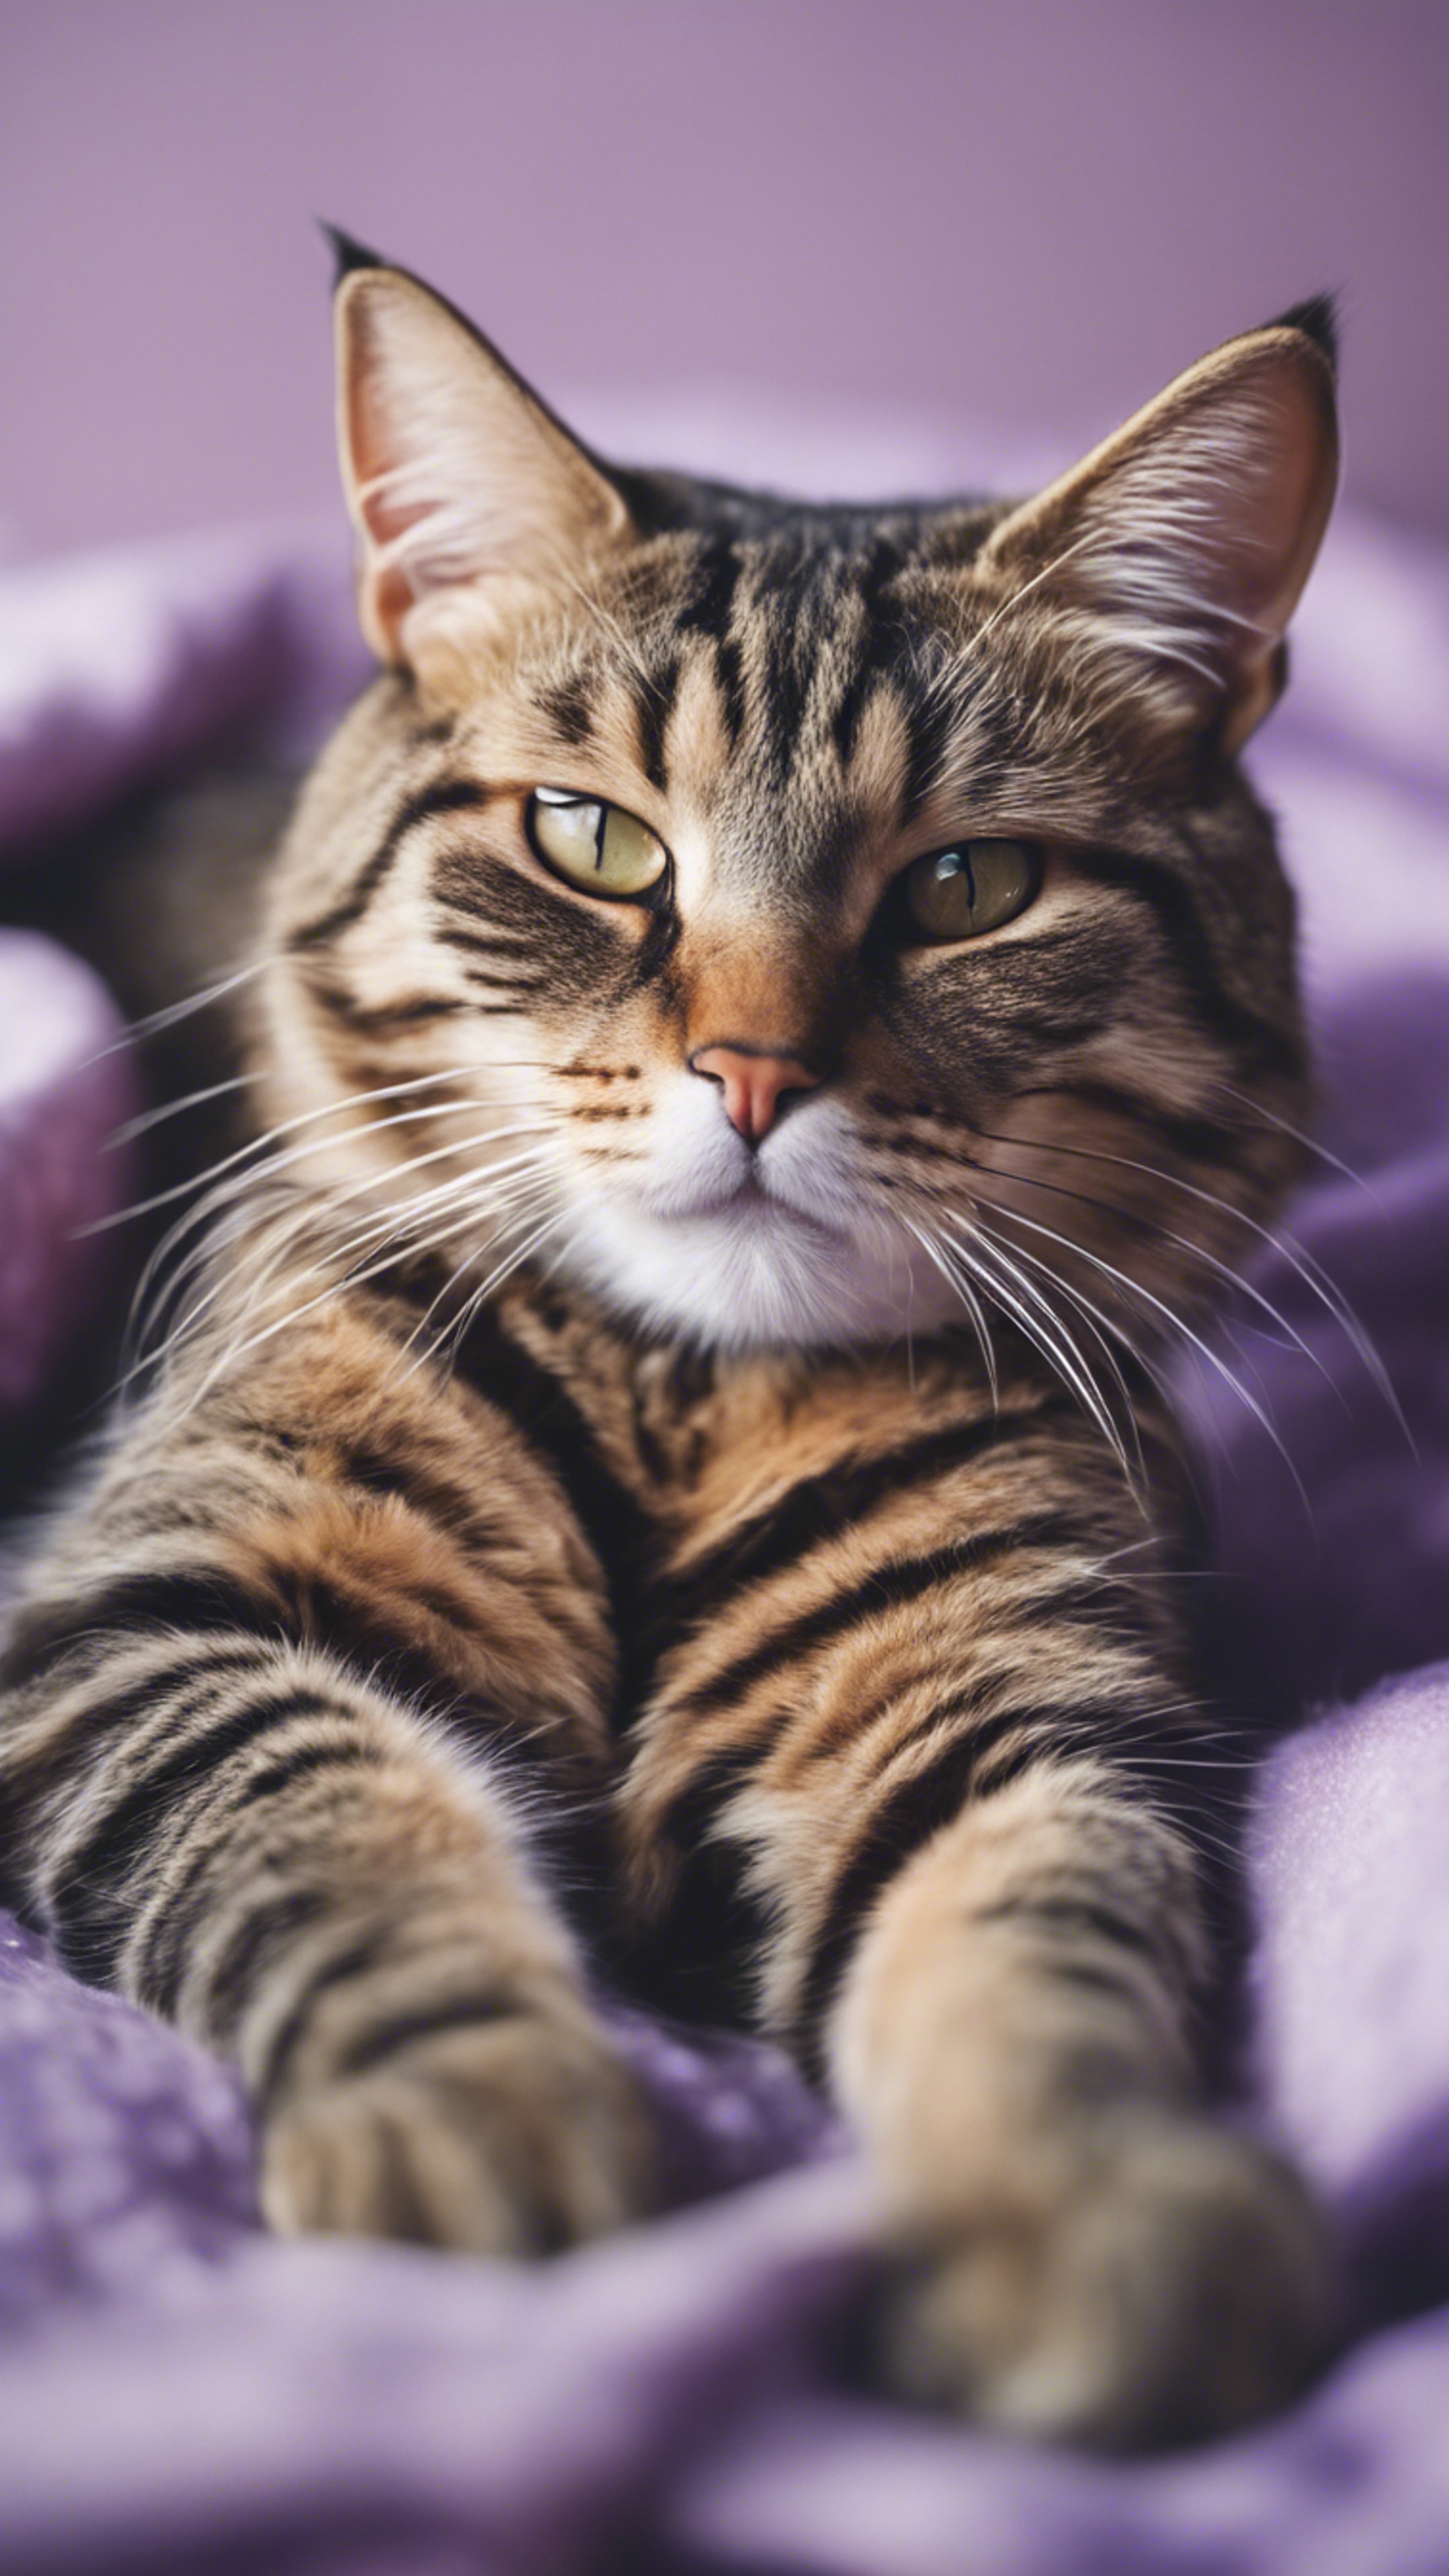 A candid portrait of a tabby cat lounging on a pastel purple blanket. Tapet[f4cf510d1a1d426195dc]